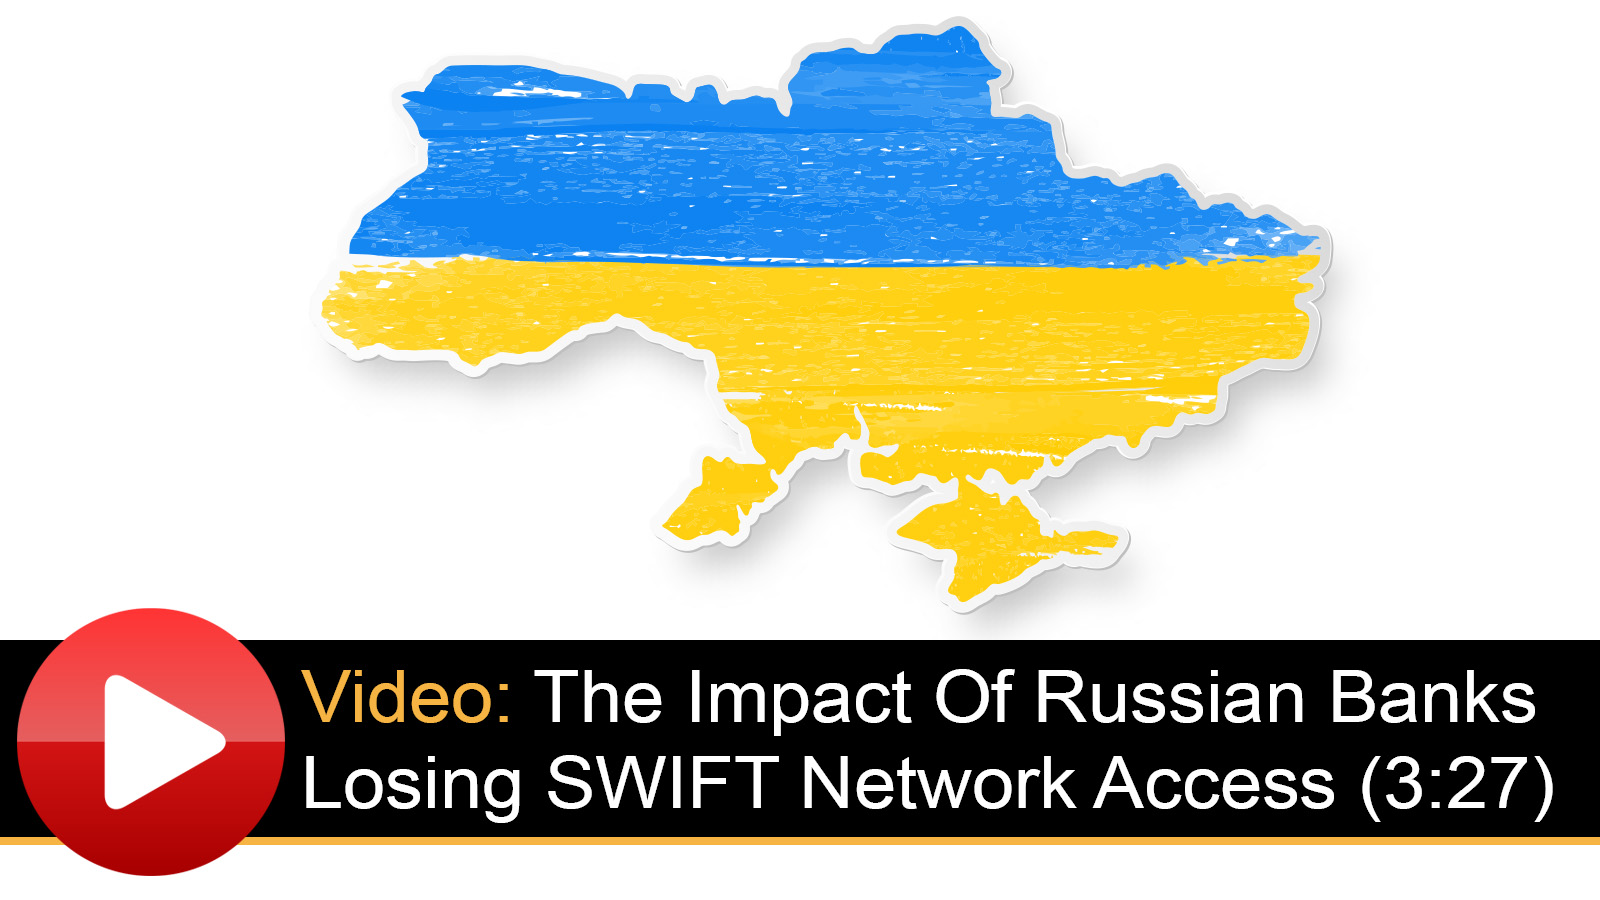 What Losing SWIFT Network Access Means for Russian Banks